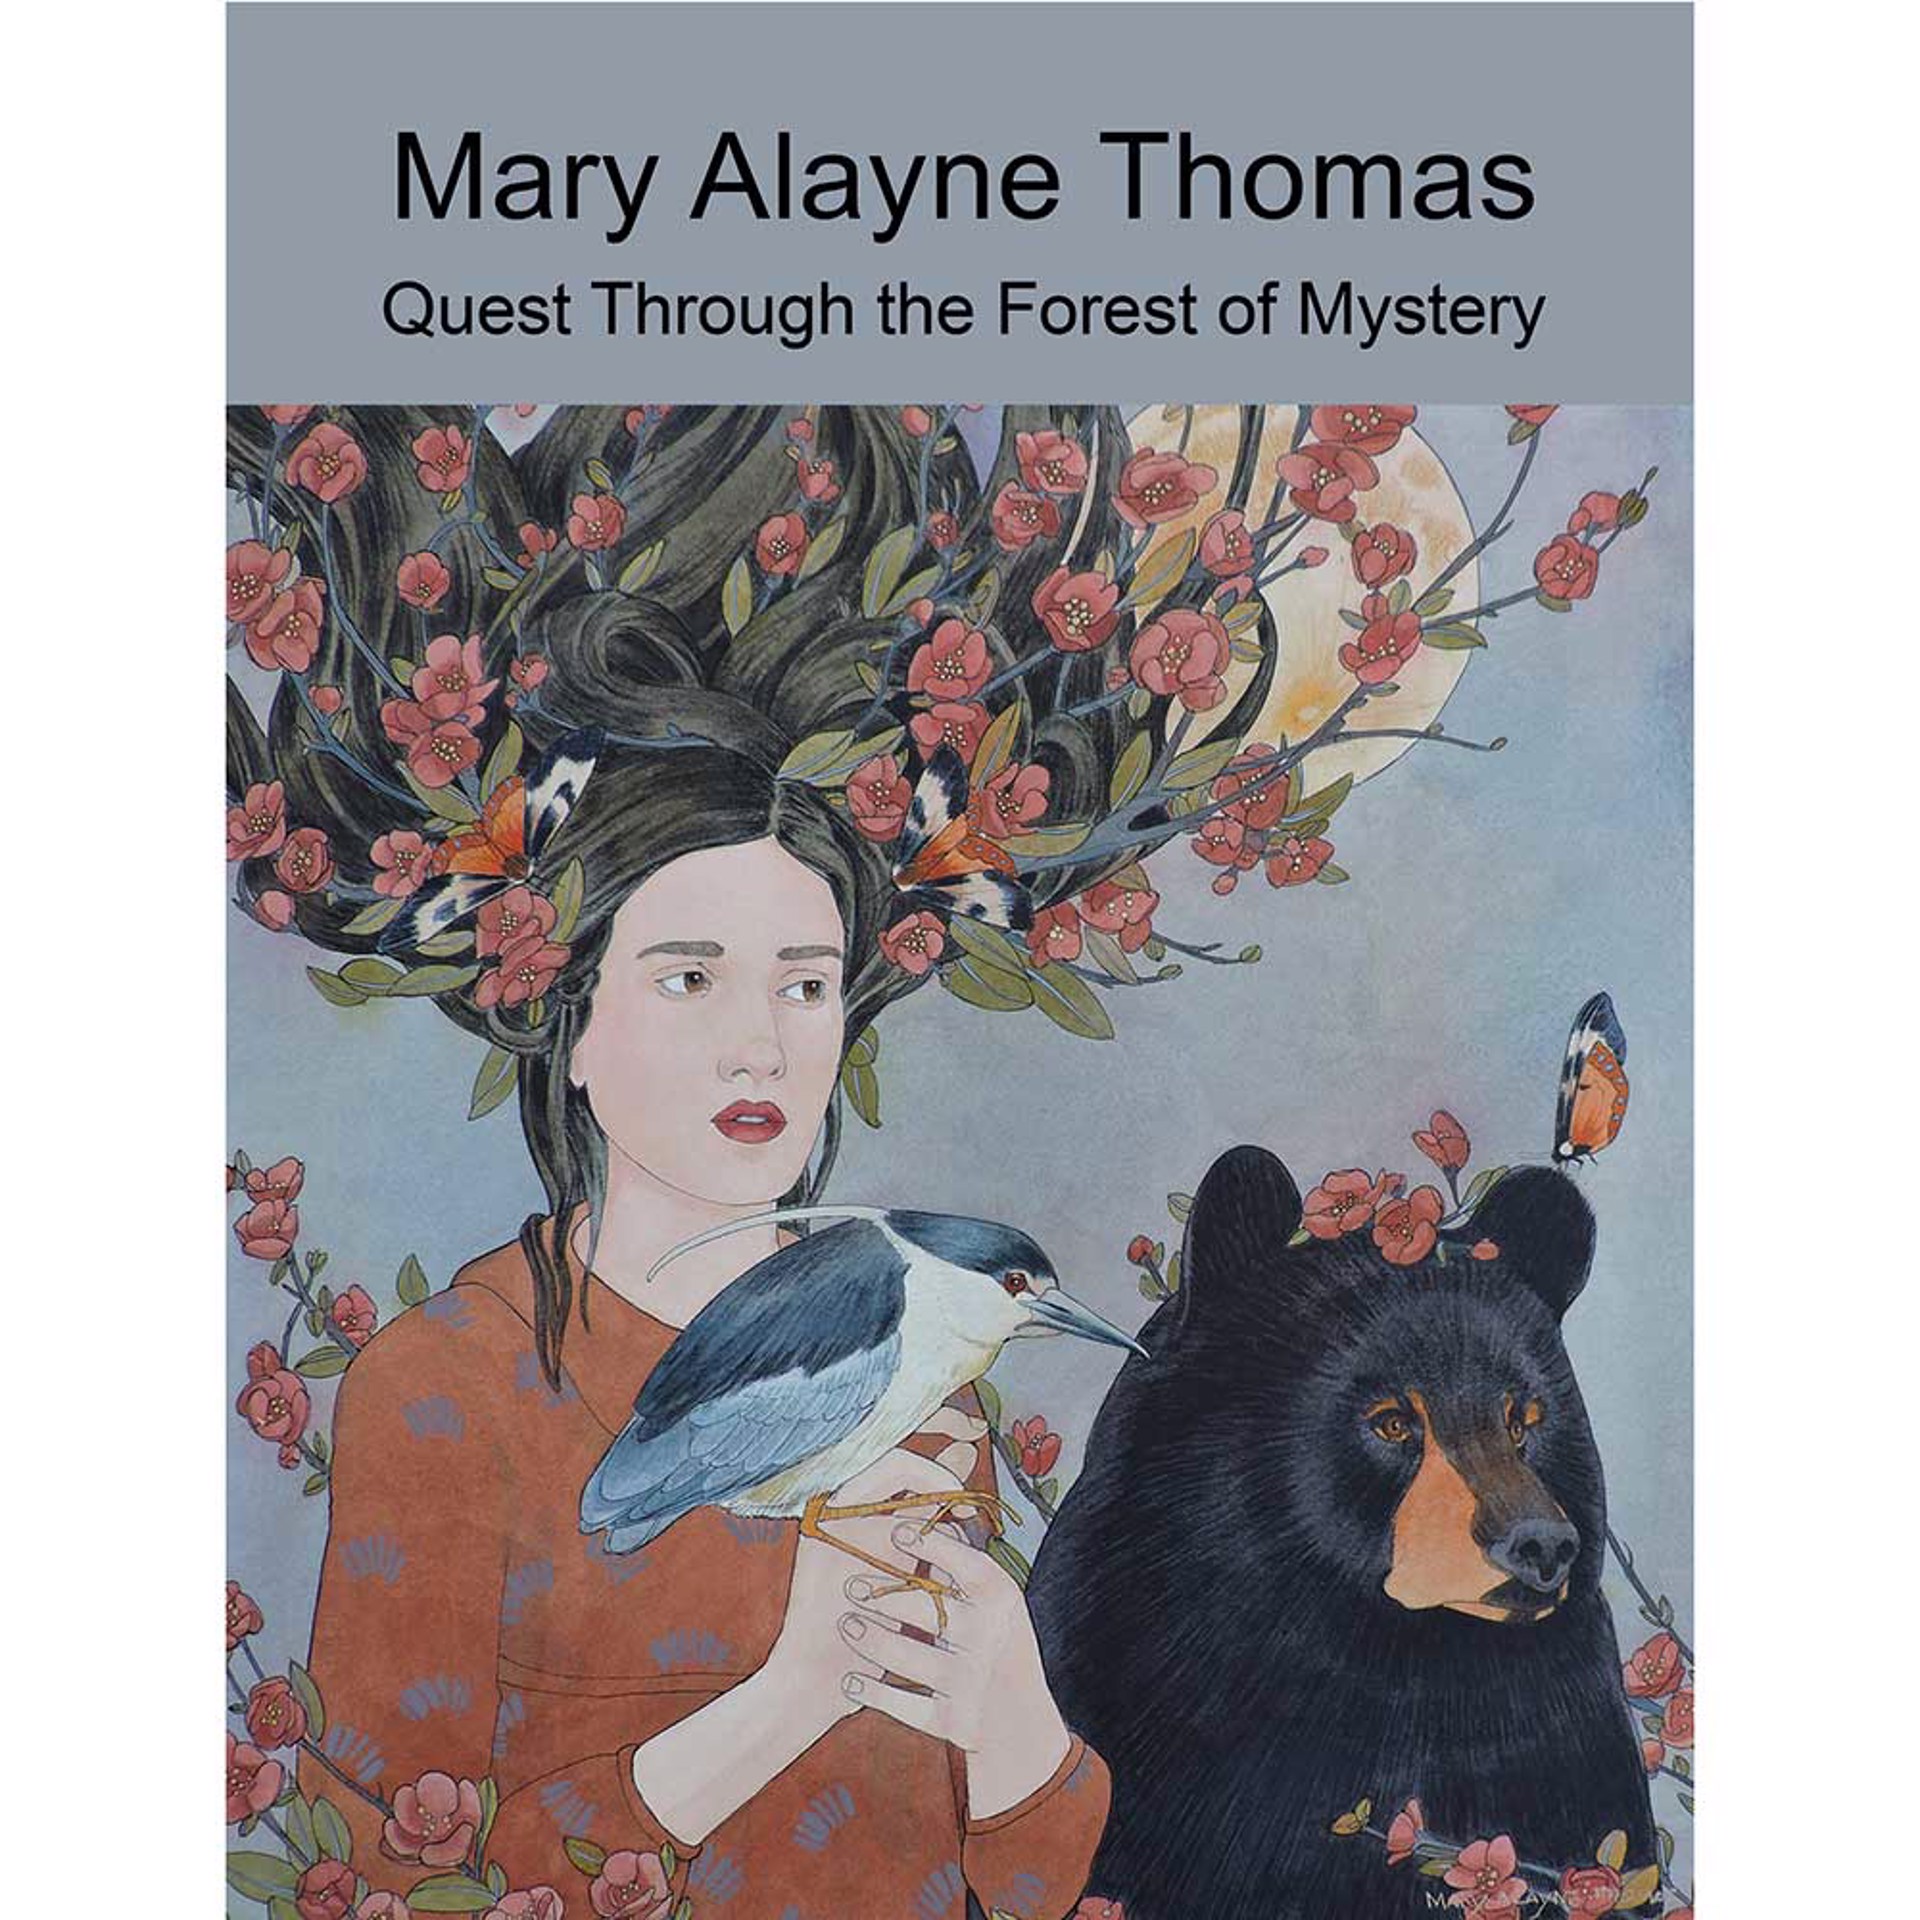 Book: Quest Through the Forest of Mystery by Mary Alayne Thomas